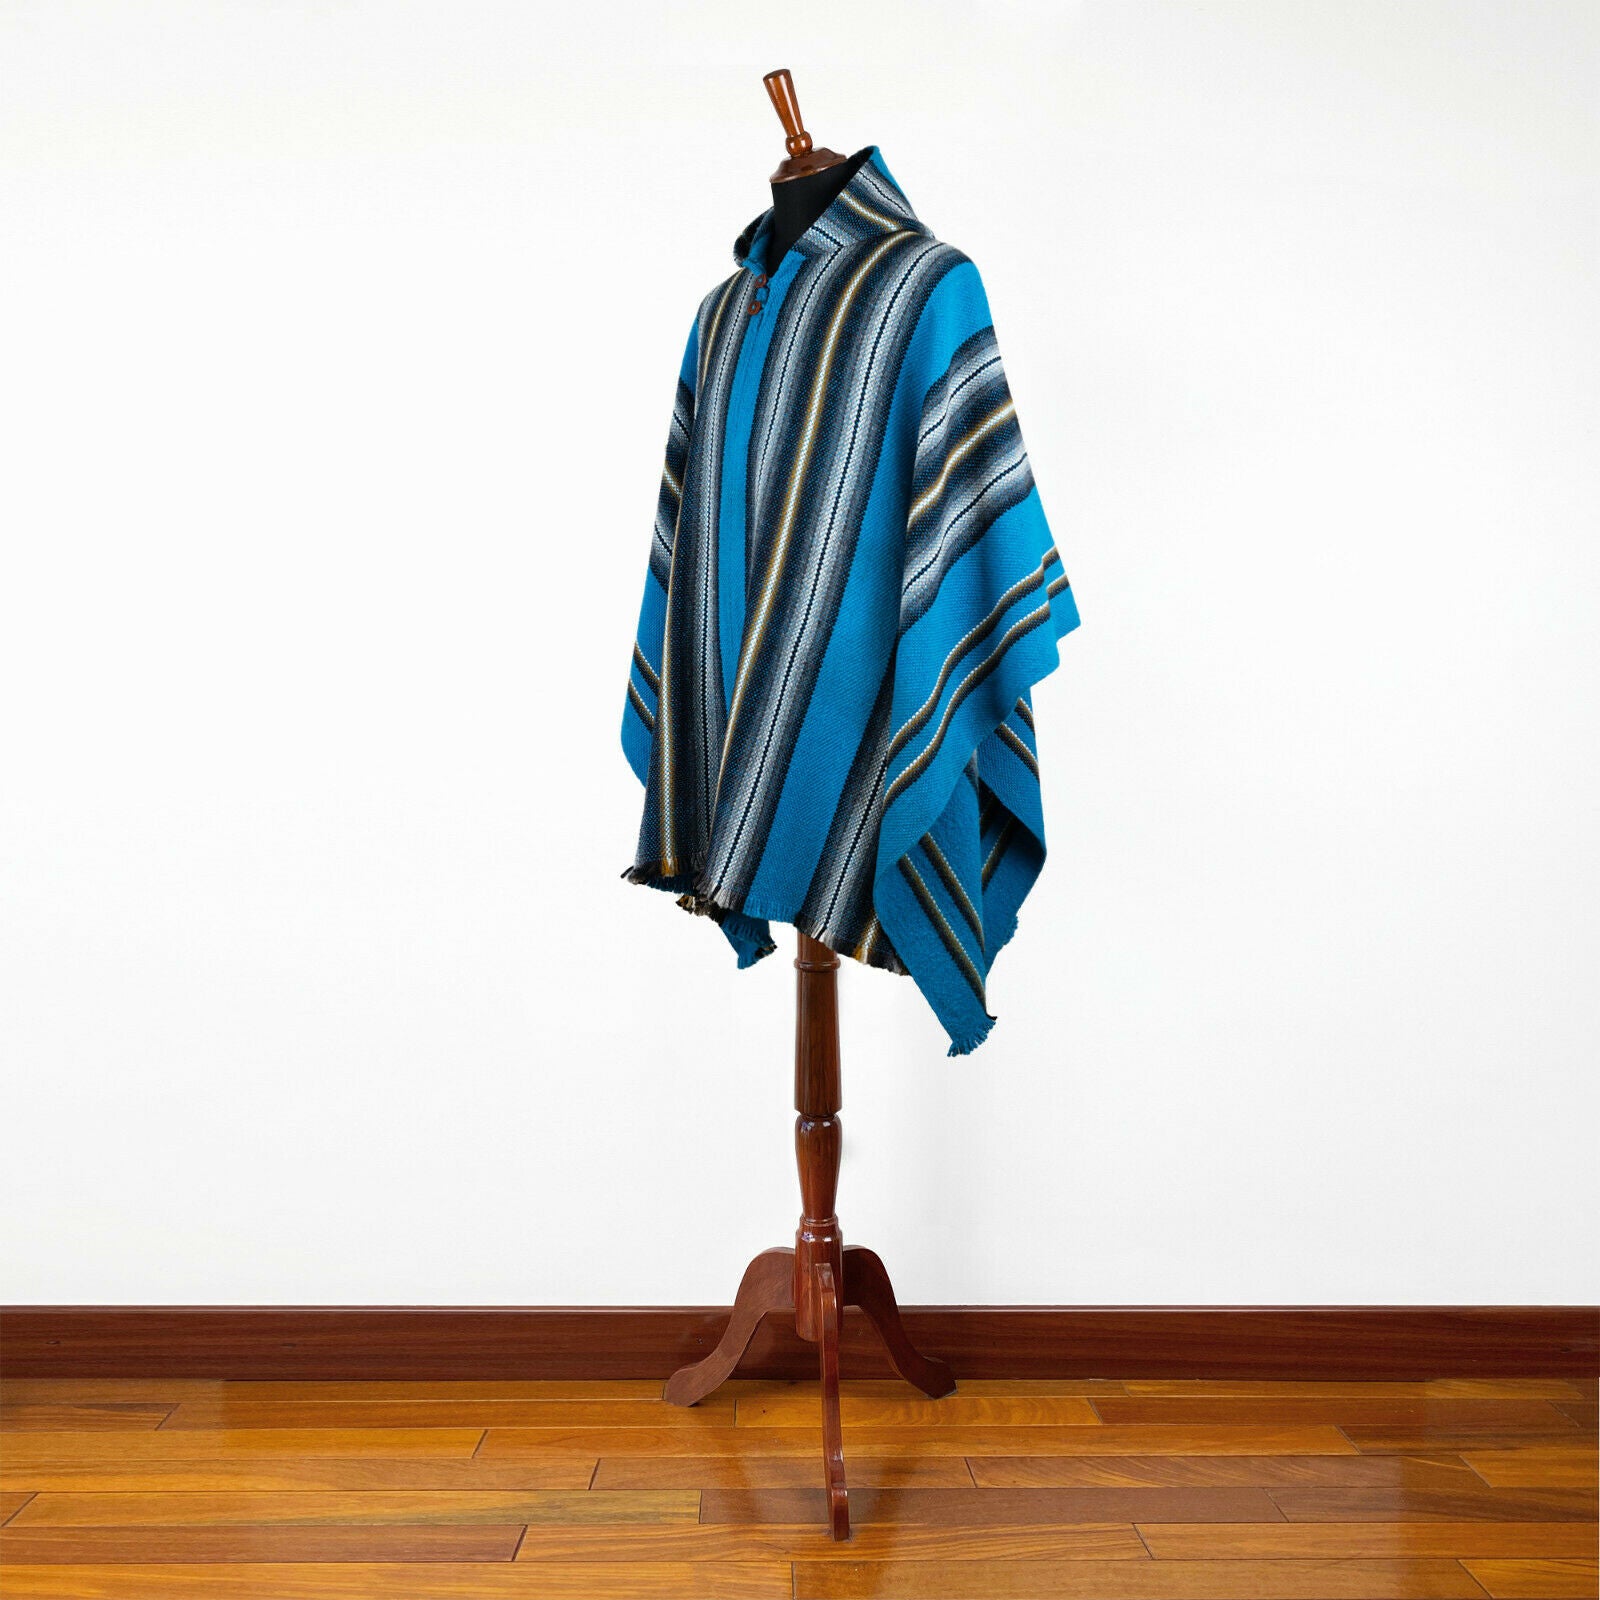 Ayuy - Llama Wool Unisex South American Handwoven Thick Hooded Poncho - striped - azure blue